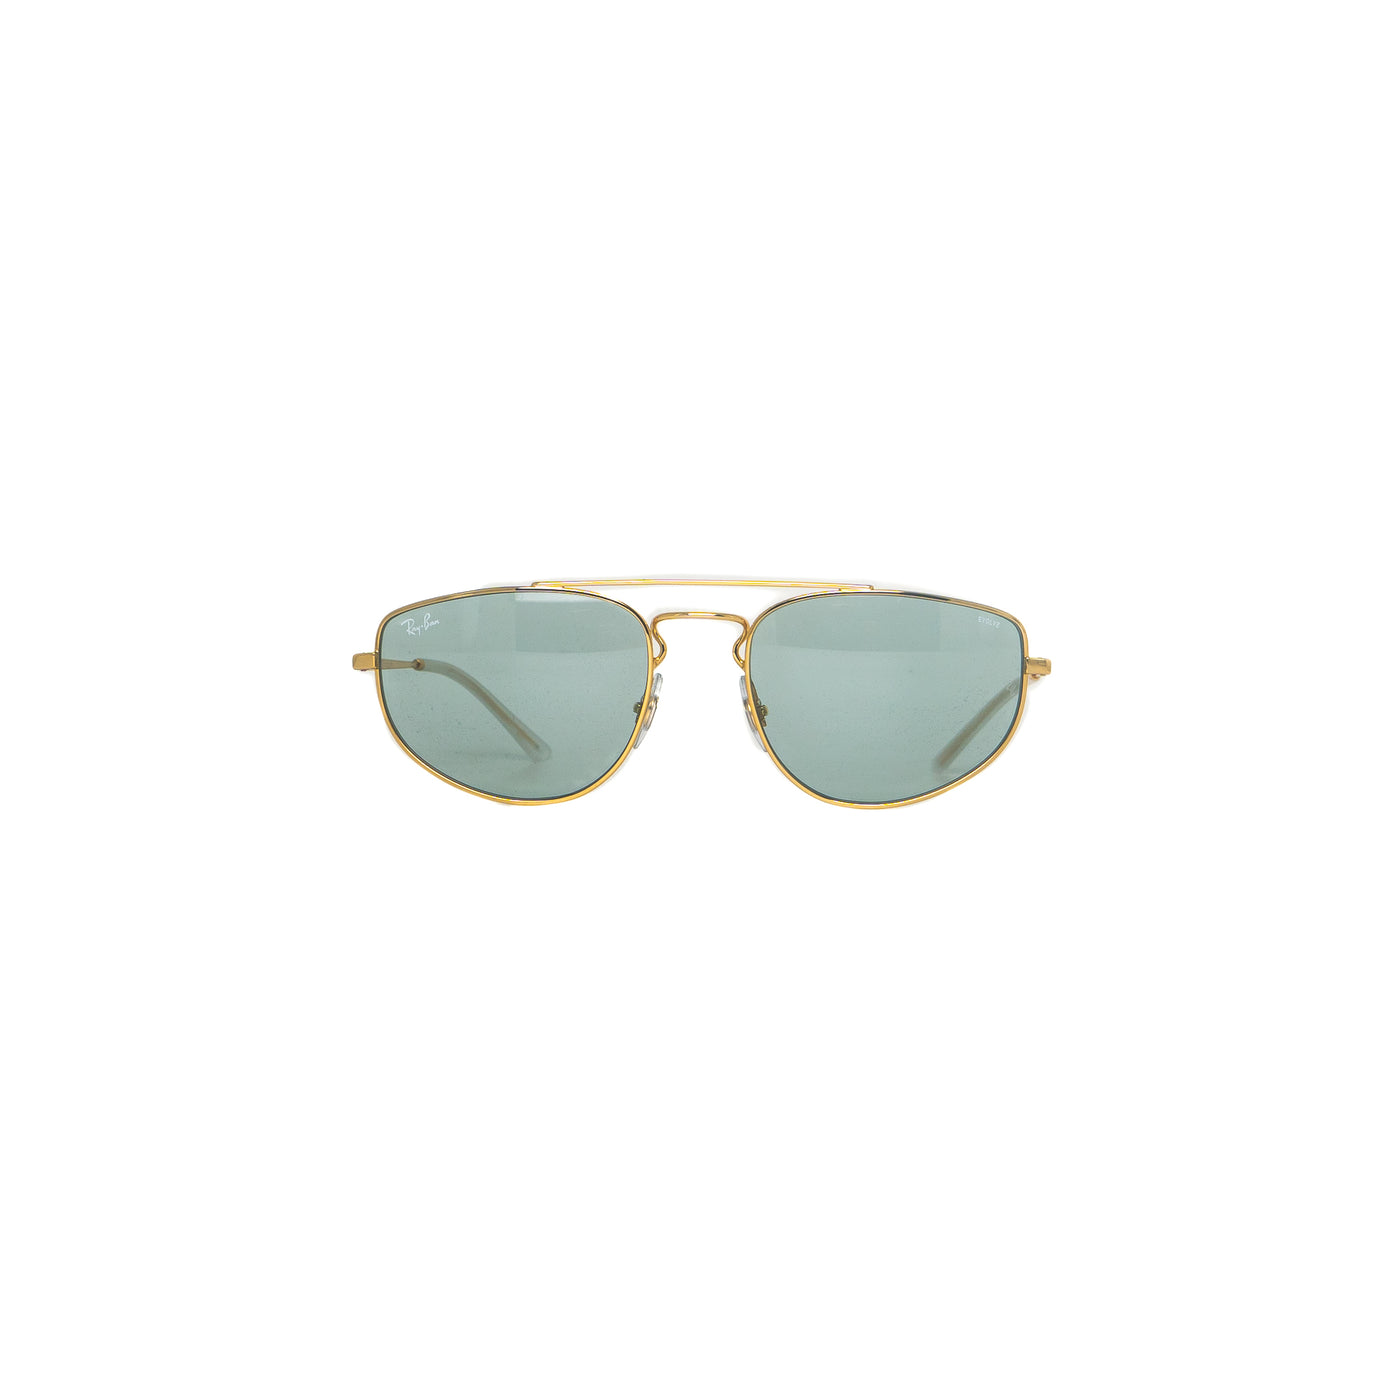 Ray-Ban Evolve RB3668/001/Q5 | Sunglasses - Vision Express Optical Philippines